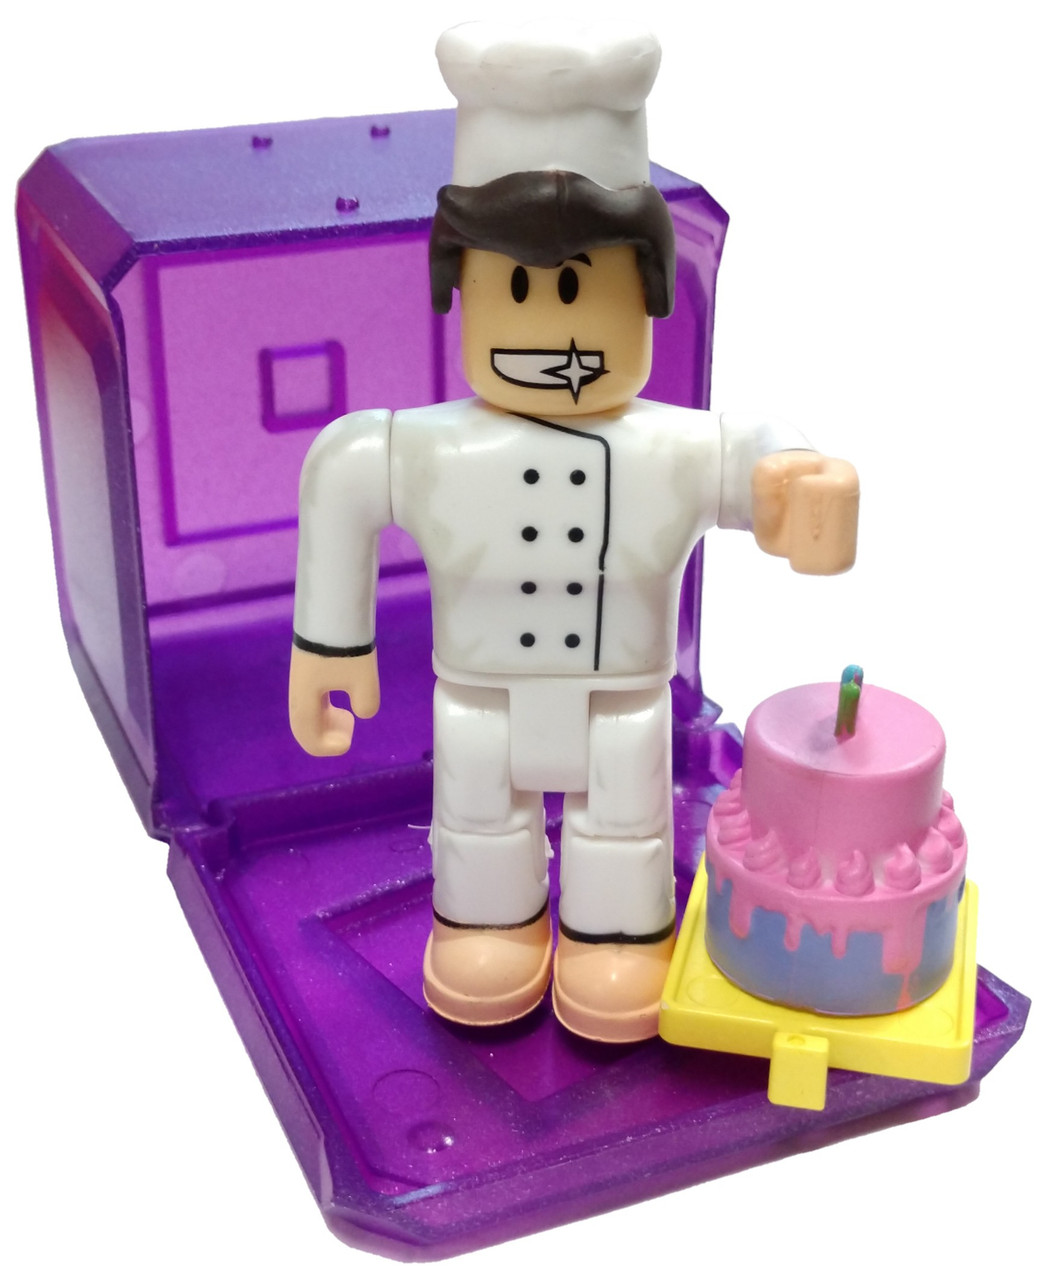 Roblox Celebrity Collection Series 3 Bakers Valley Cakemaster 3 Mini Figure With Cube And Online Code Loose Jazwares Toywiz - new roblox purple celebrity series 3 mystery meep city ice cream